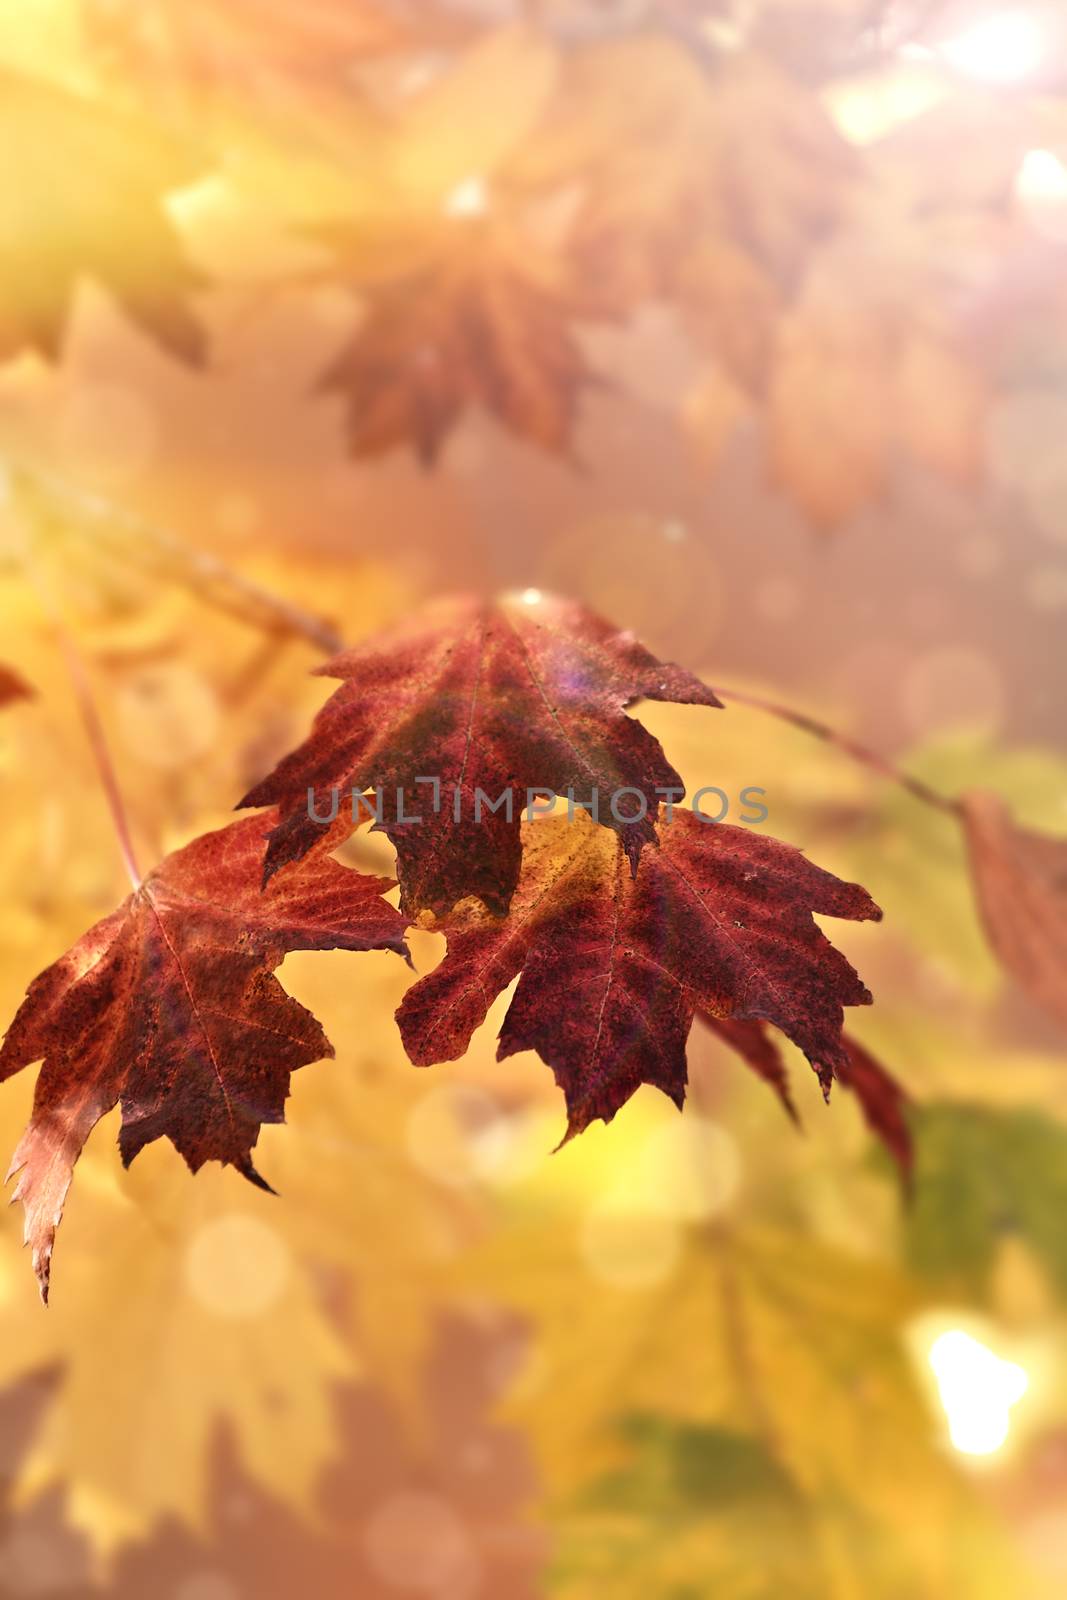 Defocused Maple leaves in the autumn sun lights with copy space. Extreme shallow depth of field.